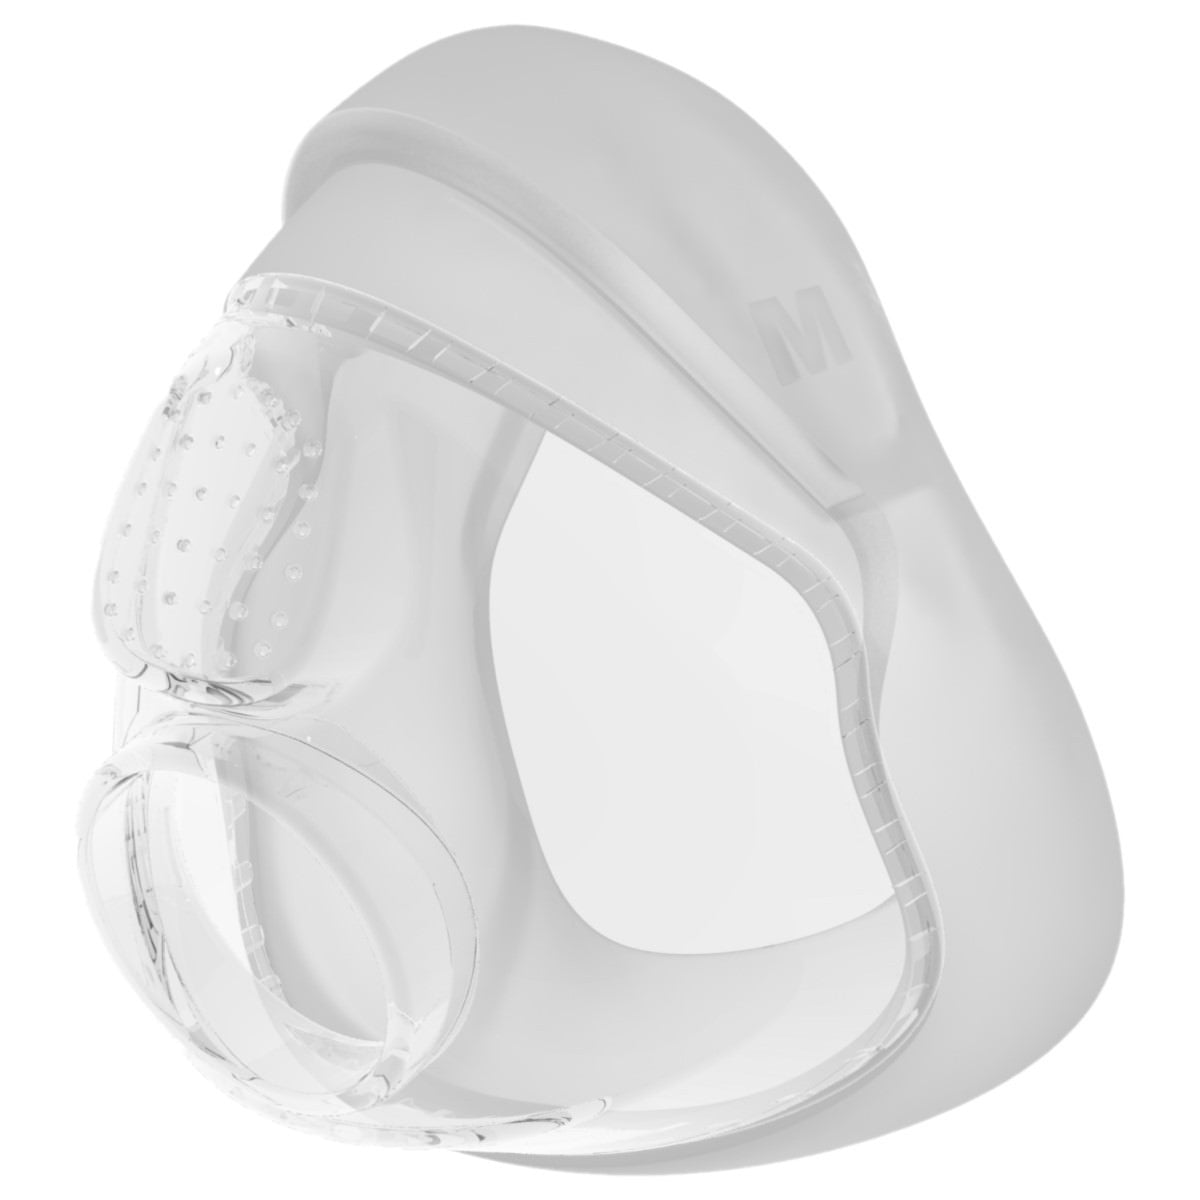 Fisher & Paykel Simplus Full Face Mask RollFit Cushion Seal